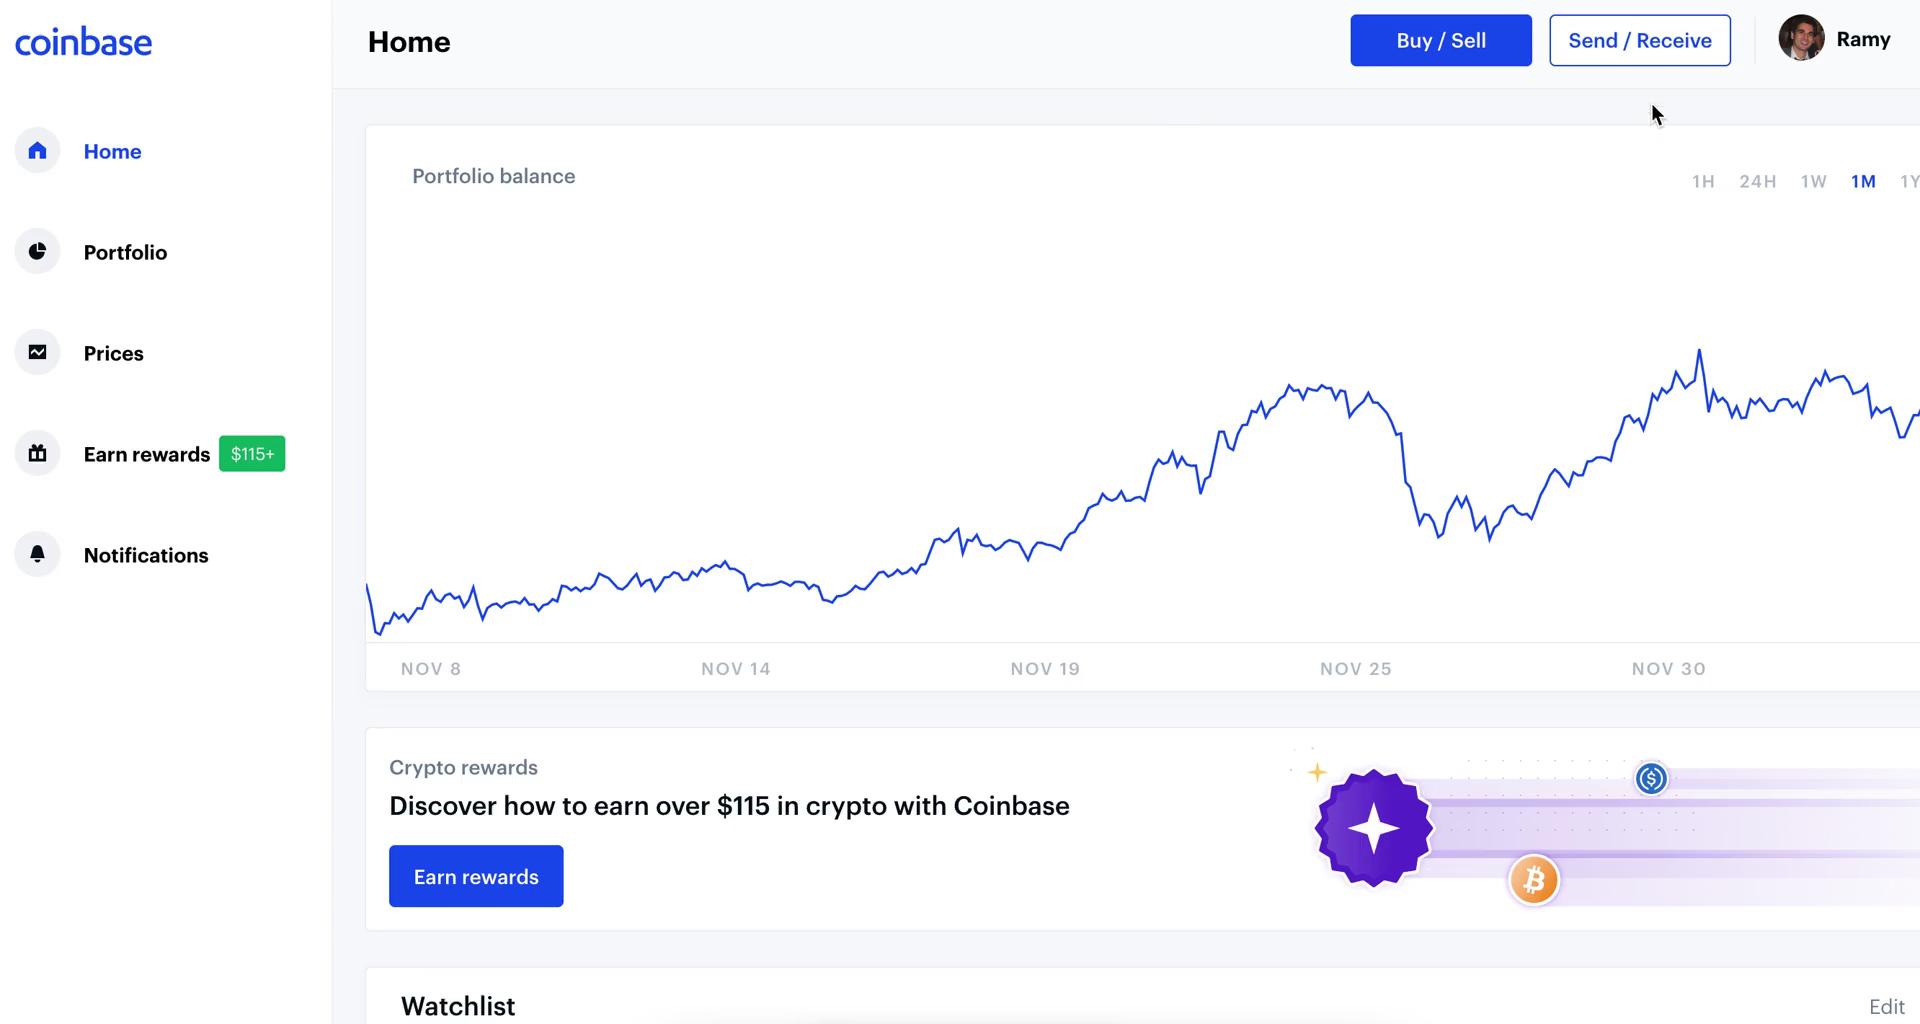 coinbase available to send